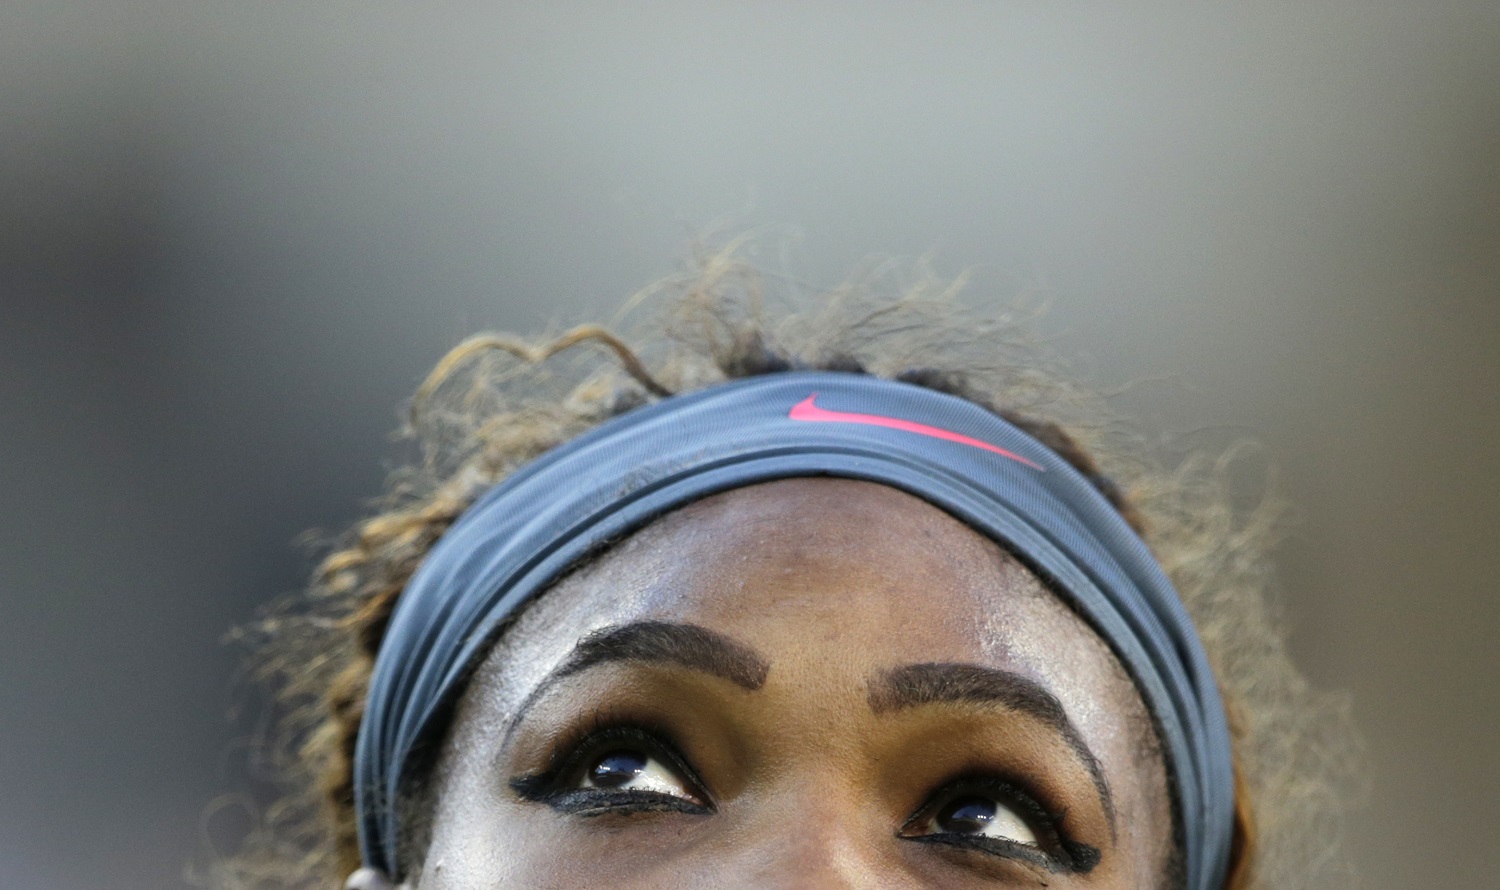 Serena Williams checks the scoreboard between points during the women's singles final of the 2013 U.S. Open tennis tournament, Sunday, Sept. 8, 2013, in New York. (AP Photo/Charles Krupa)